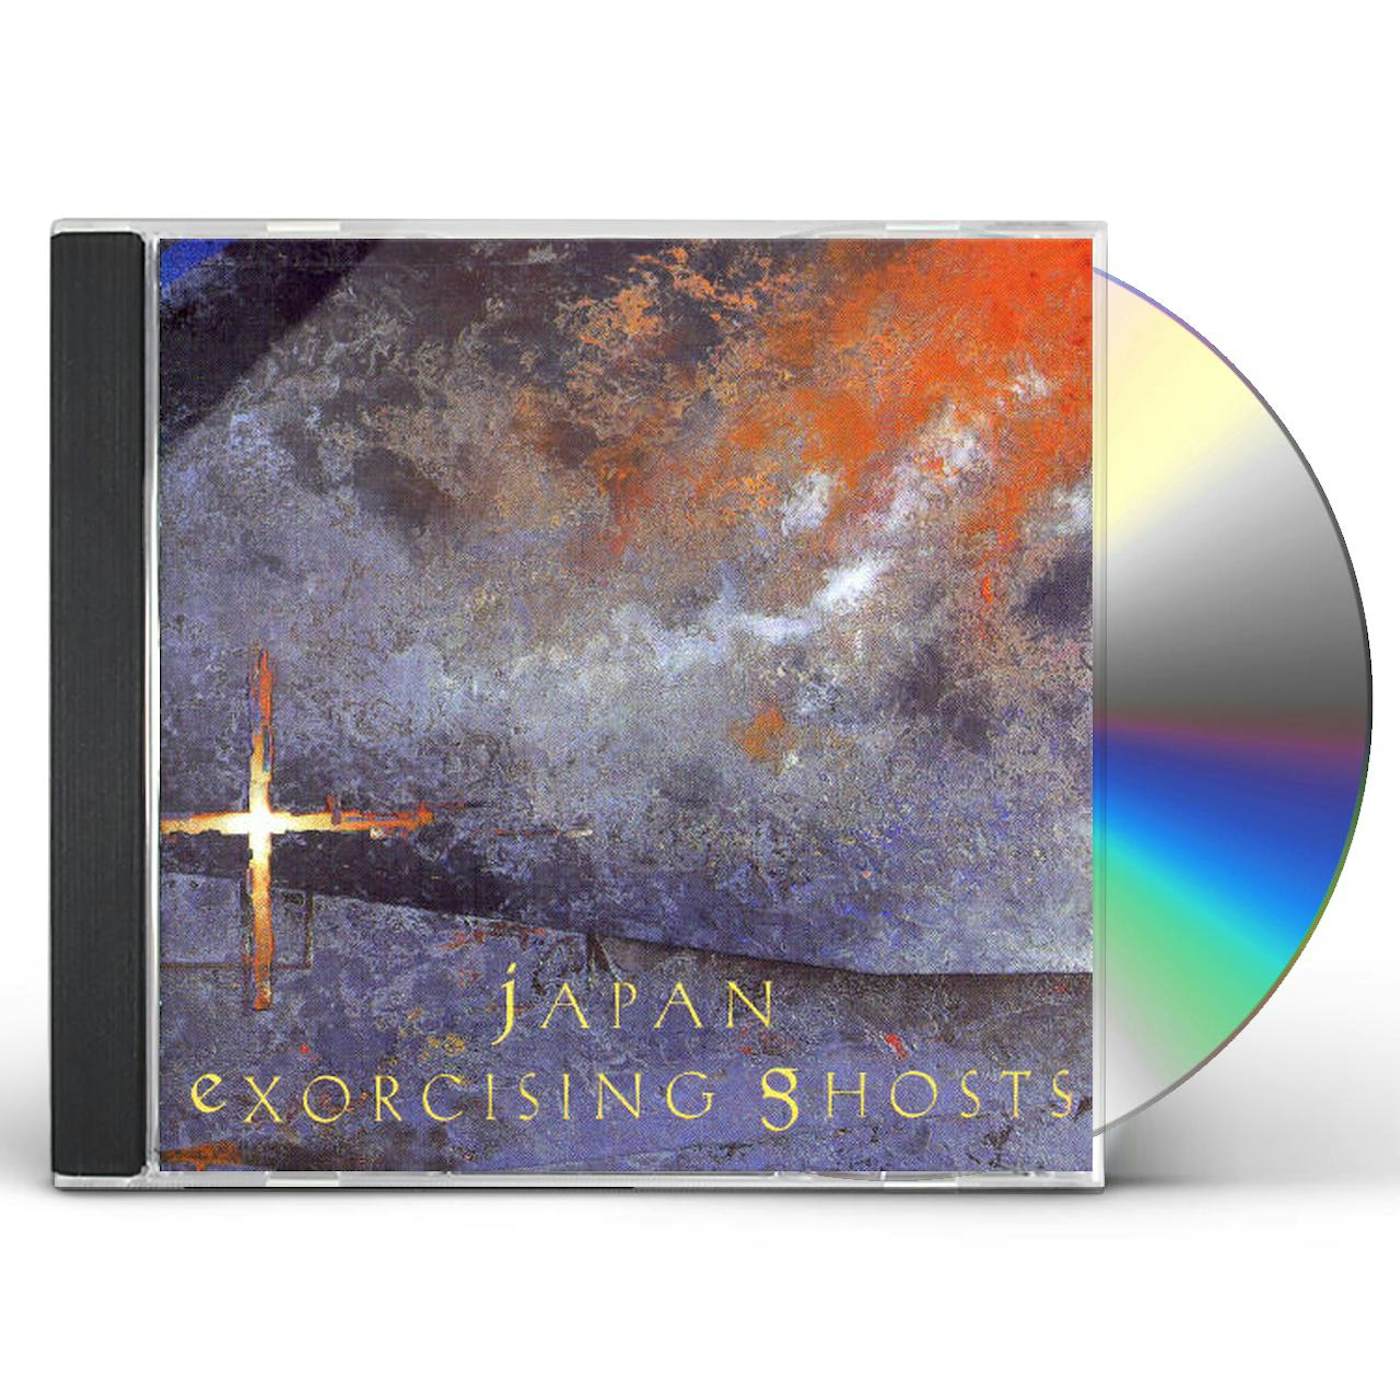 Japan EXORCISING GHOSTS: BEST OF CD